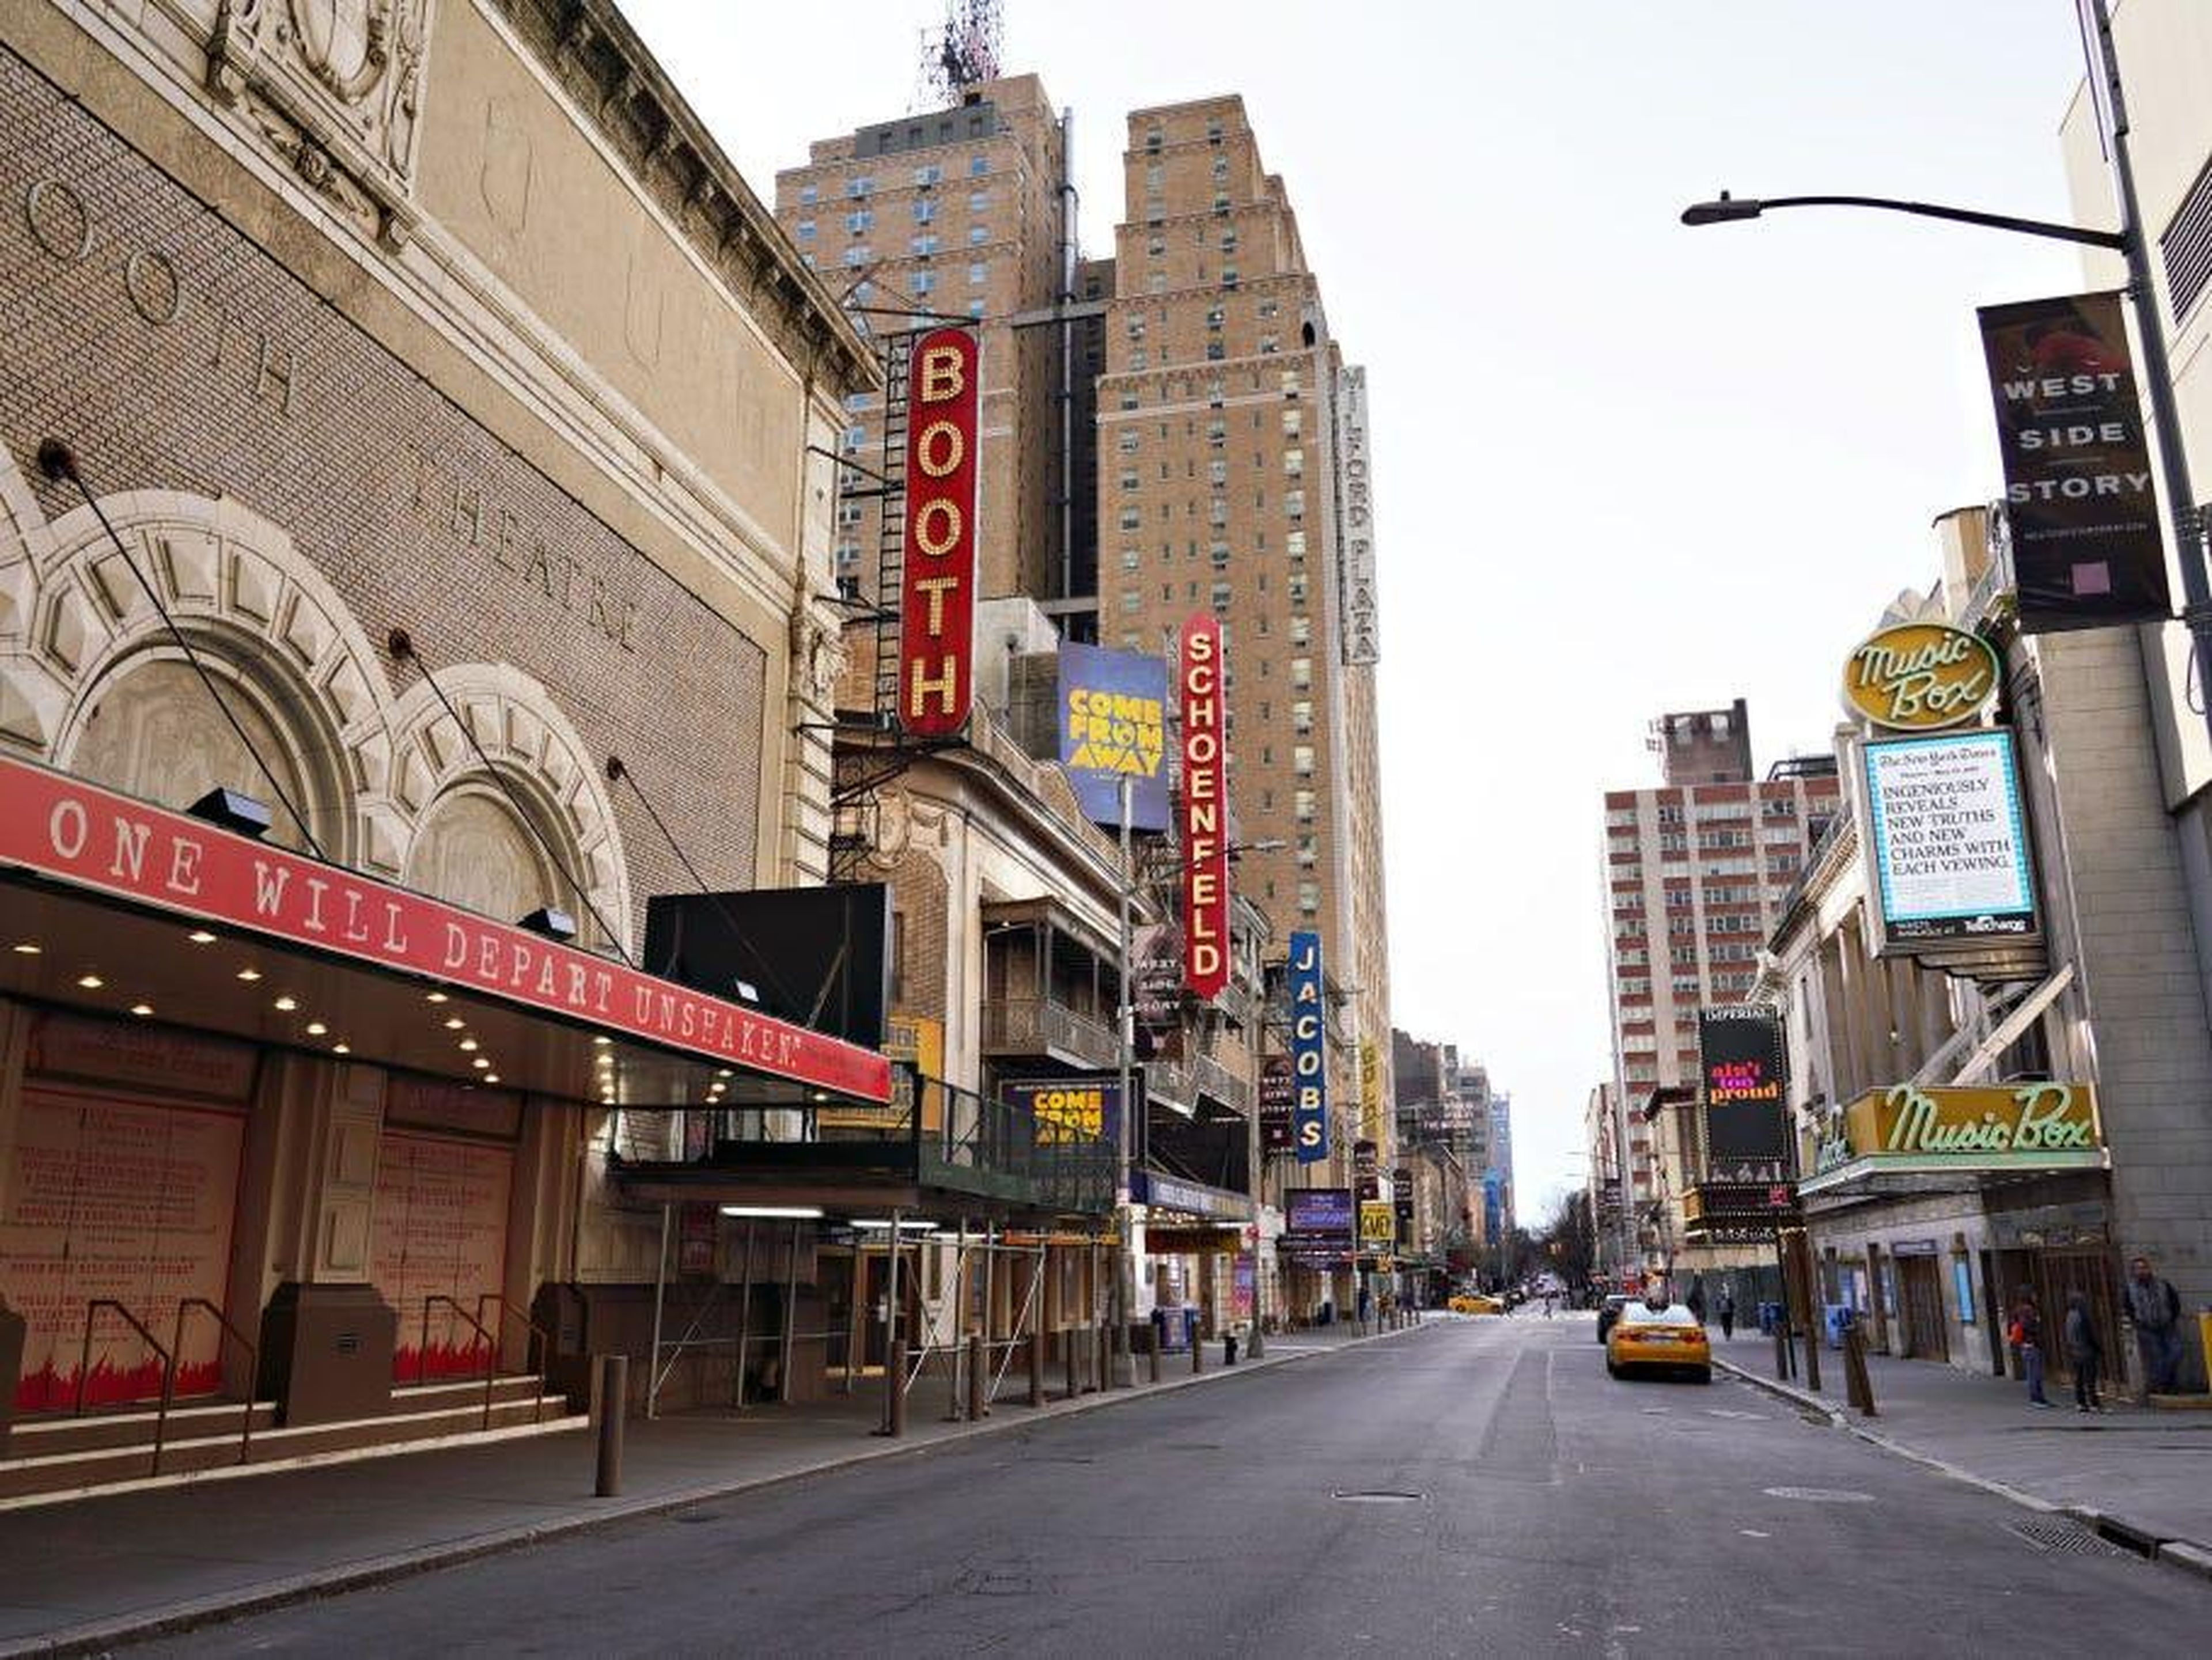 AFTER: To curb the coronavirus, theaters closed their doors, suspending all plays and musicals, on March 12.